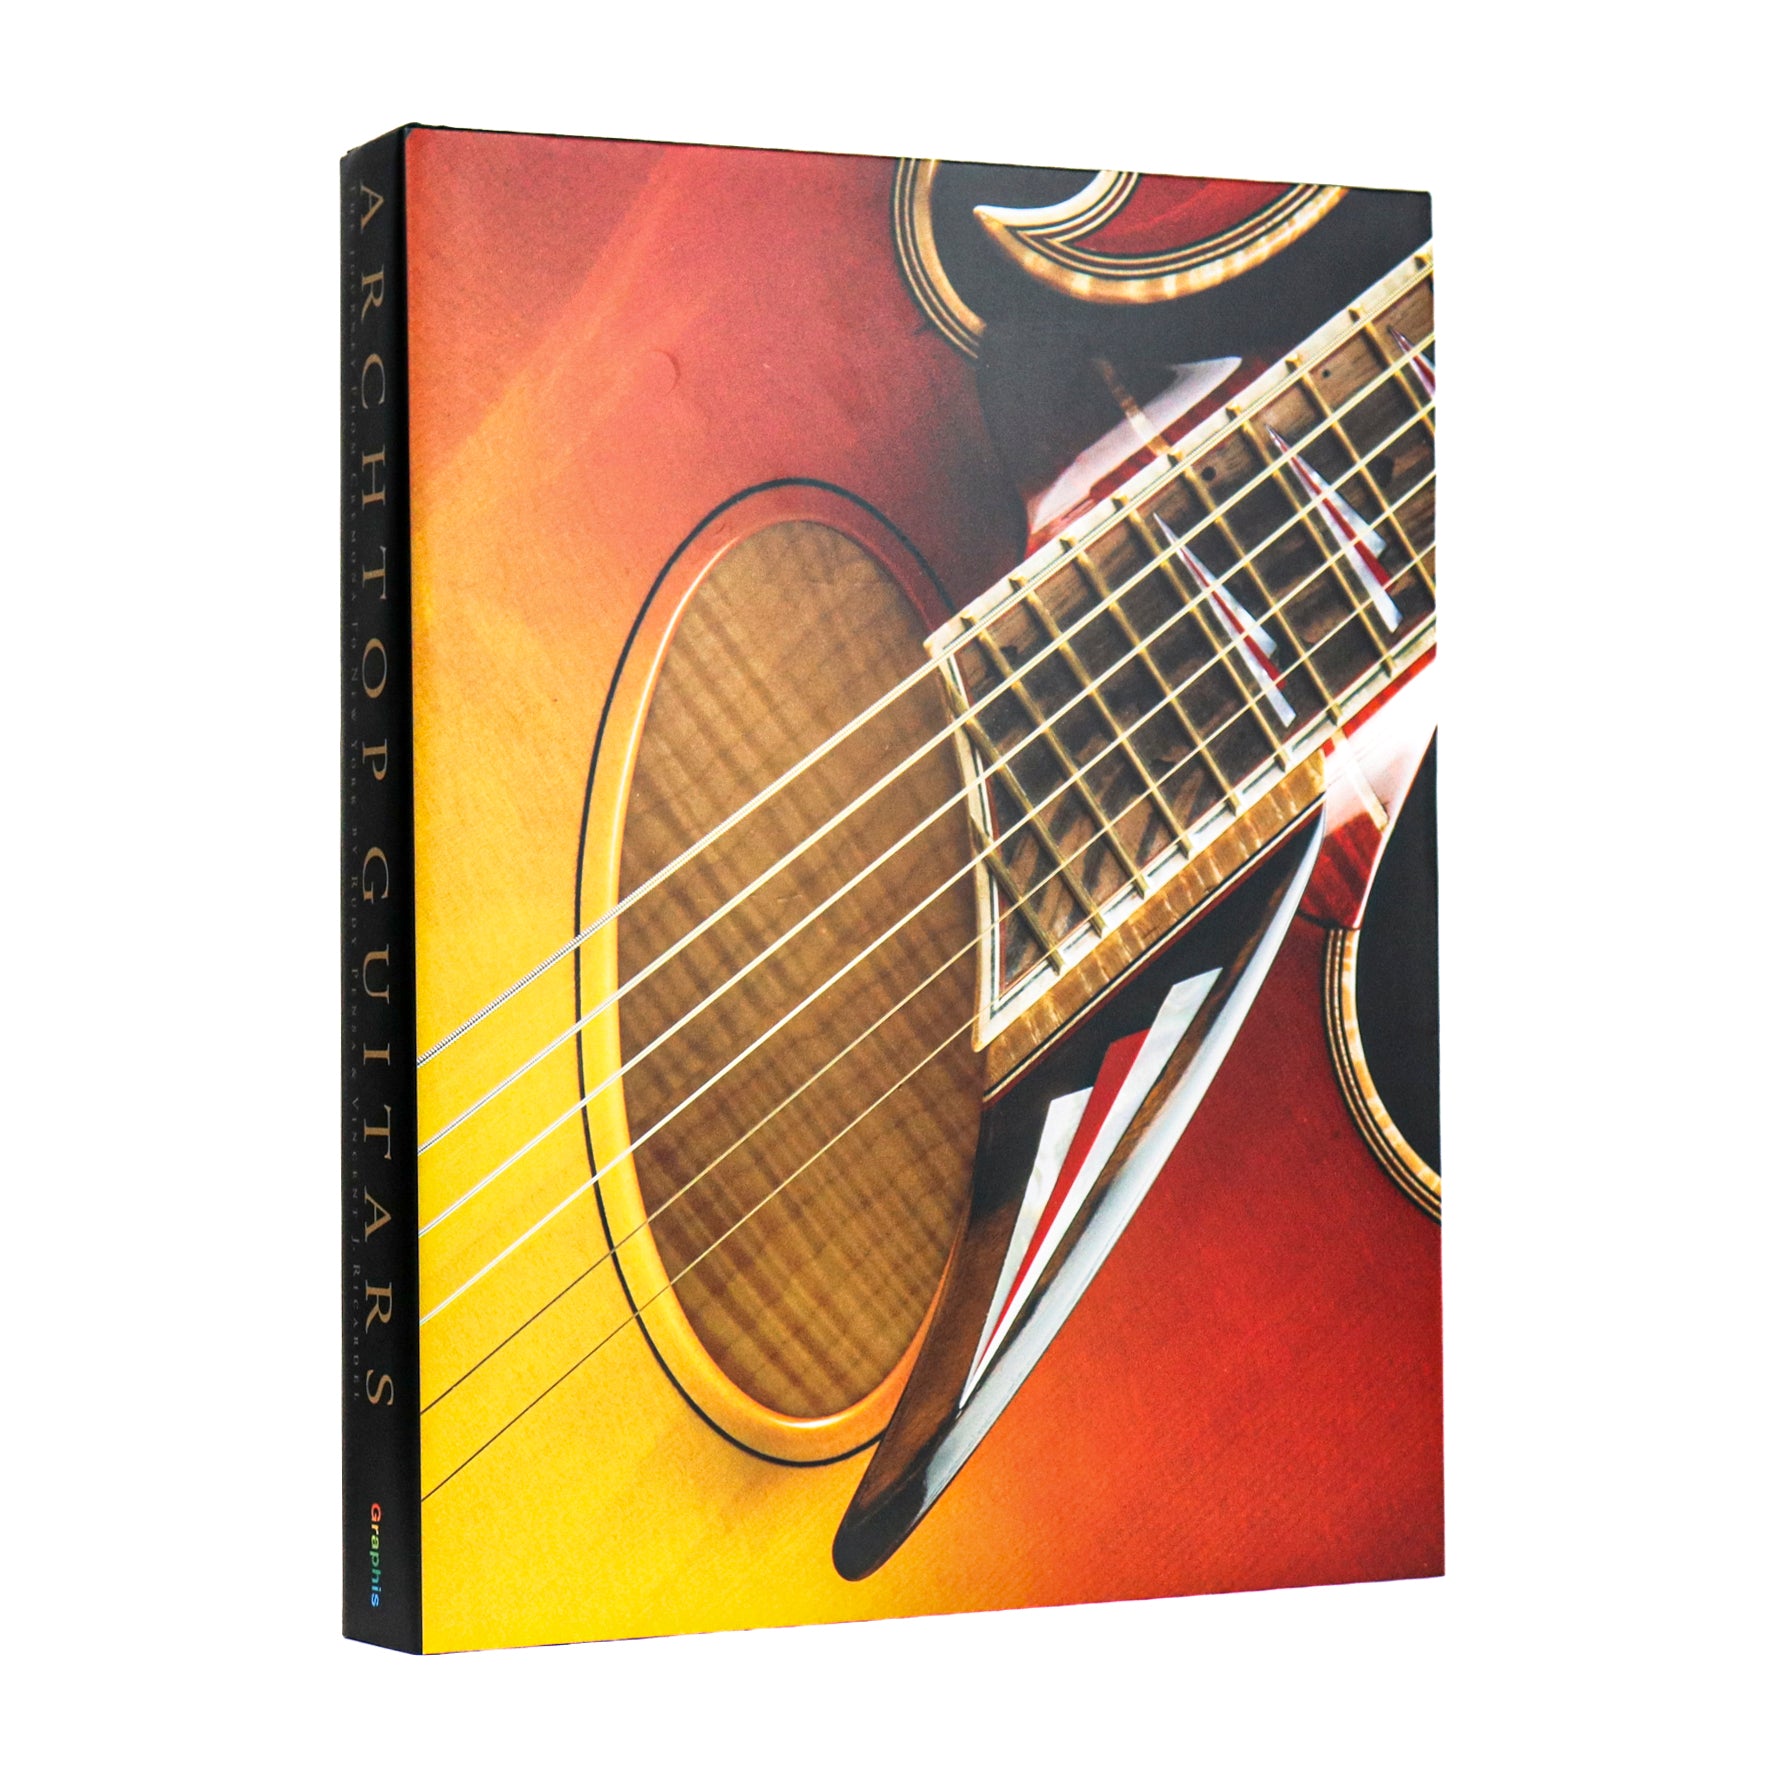 Archtop Guitars: The Journey from Cremona to New York by Rudy Pensa Standard Edition